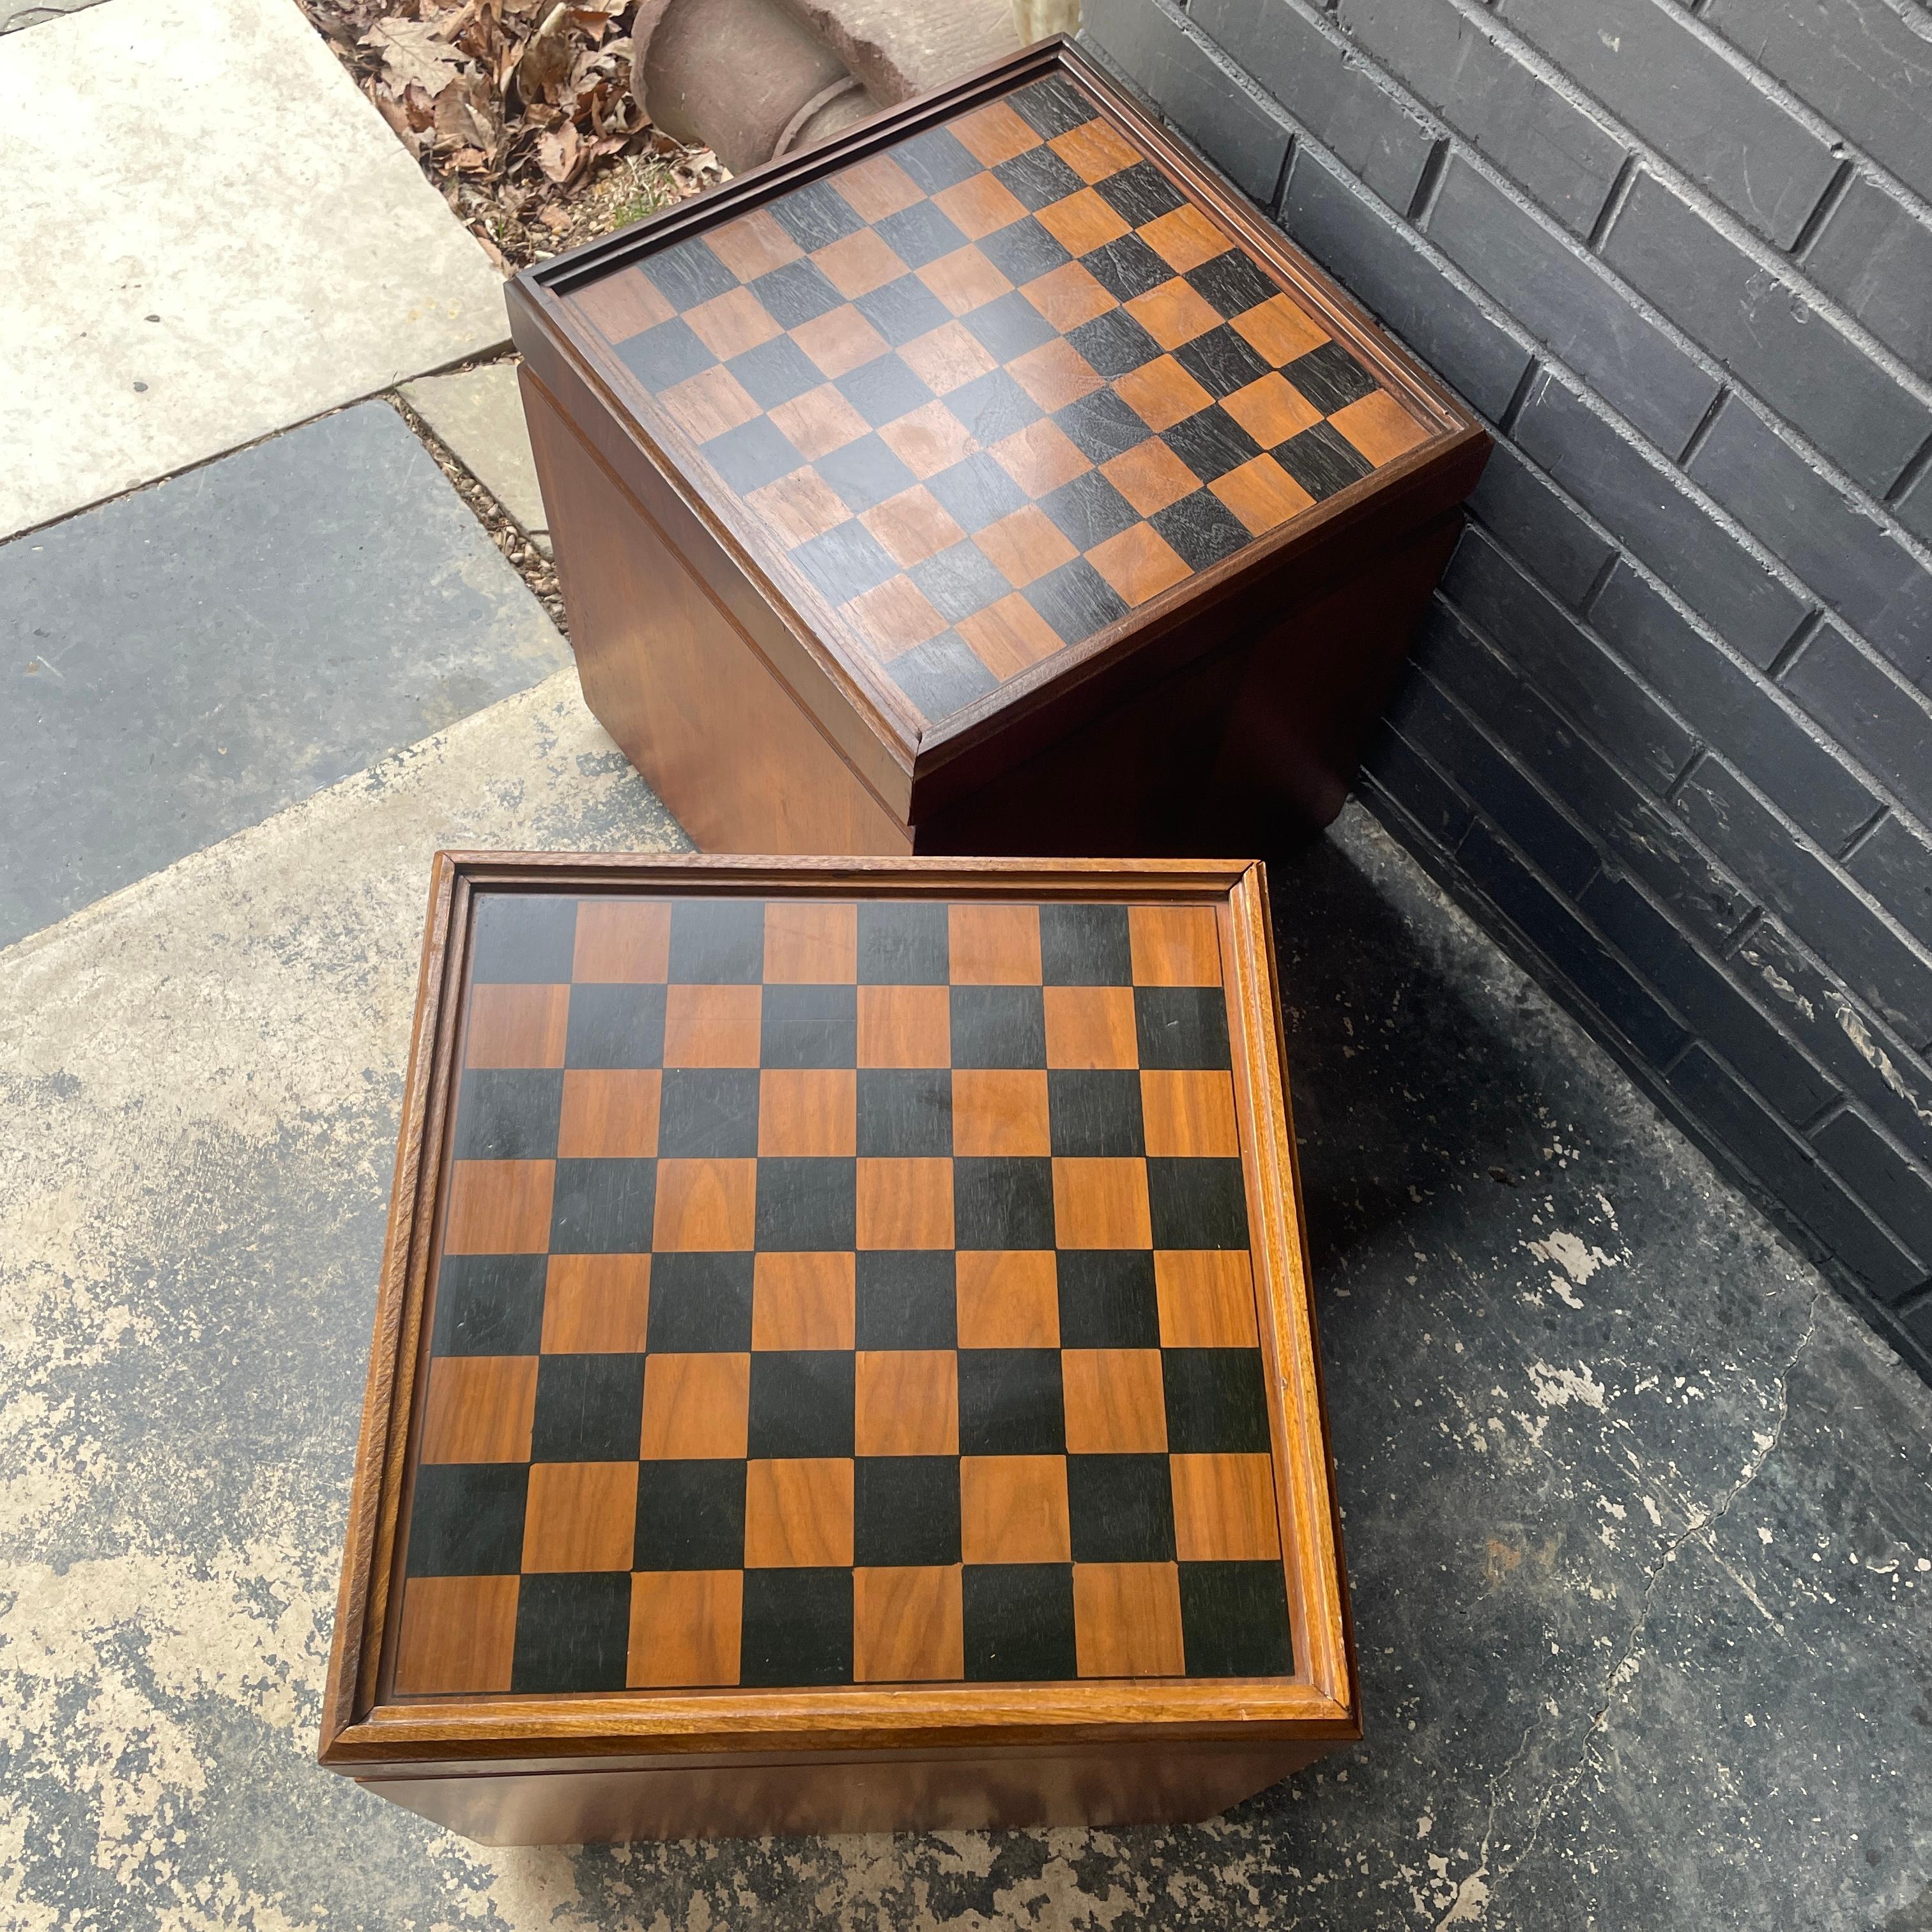 Pair of side tables, chess boards, storage chests and ottomans. Wonderful multi-functional design by Lane Furniture Company of Virginia USA.

Measures: W 16 x D 16 x H 17 in. (Add .75 inch for Cushion.)

   